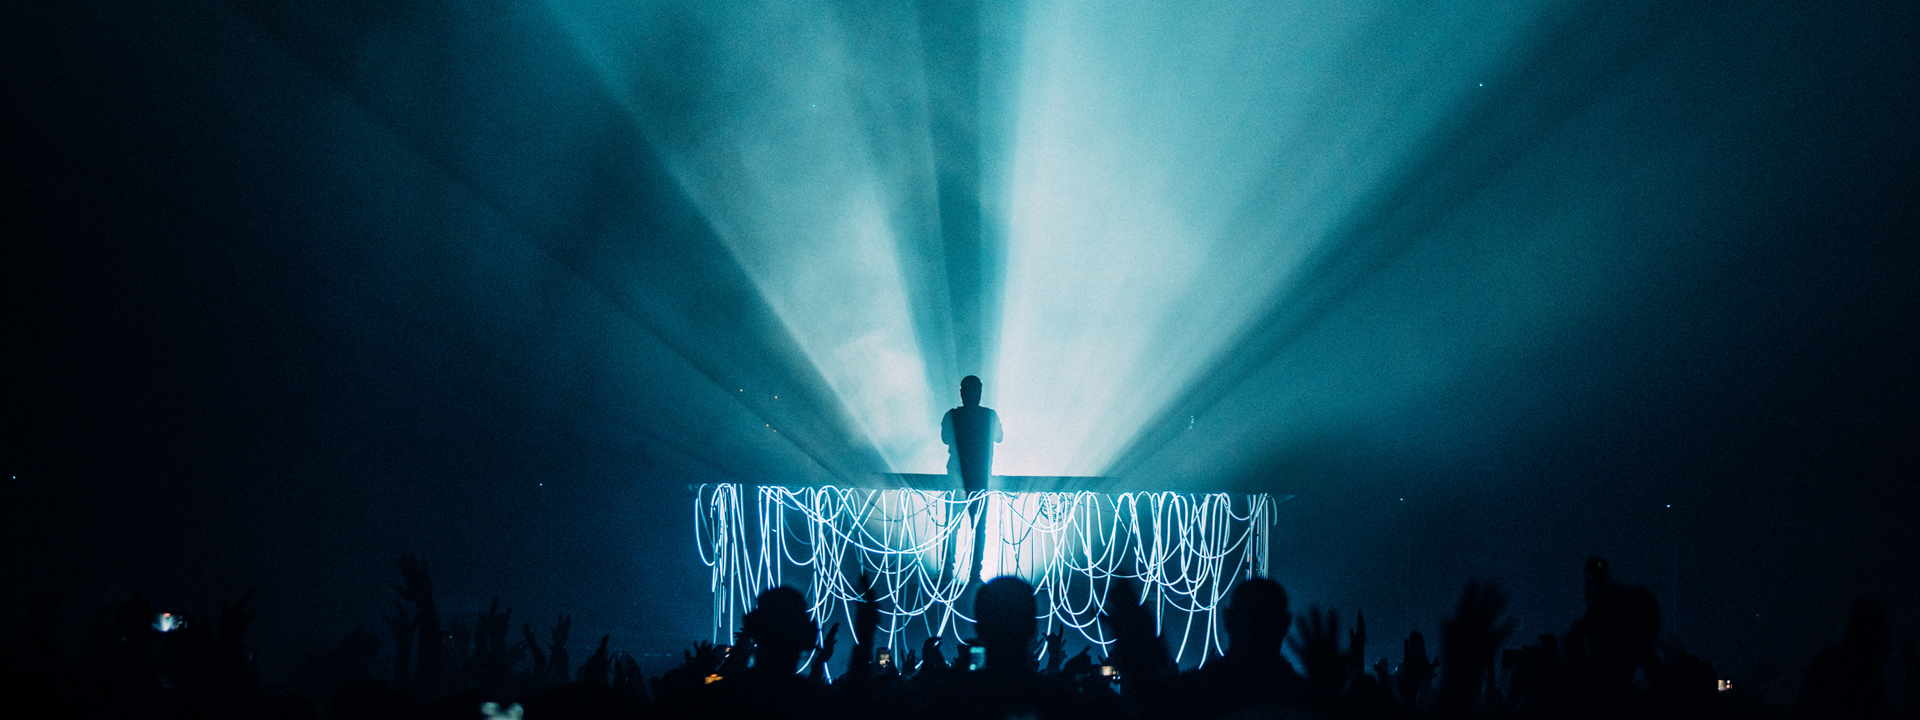 Silhouette of duke dumont standing on stage